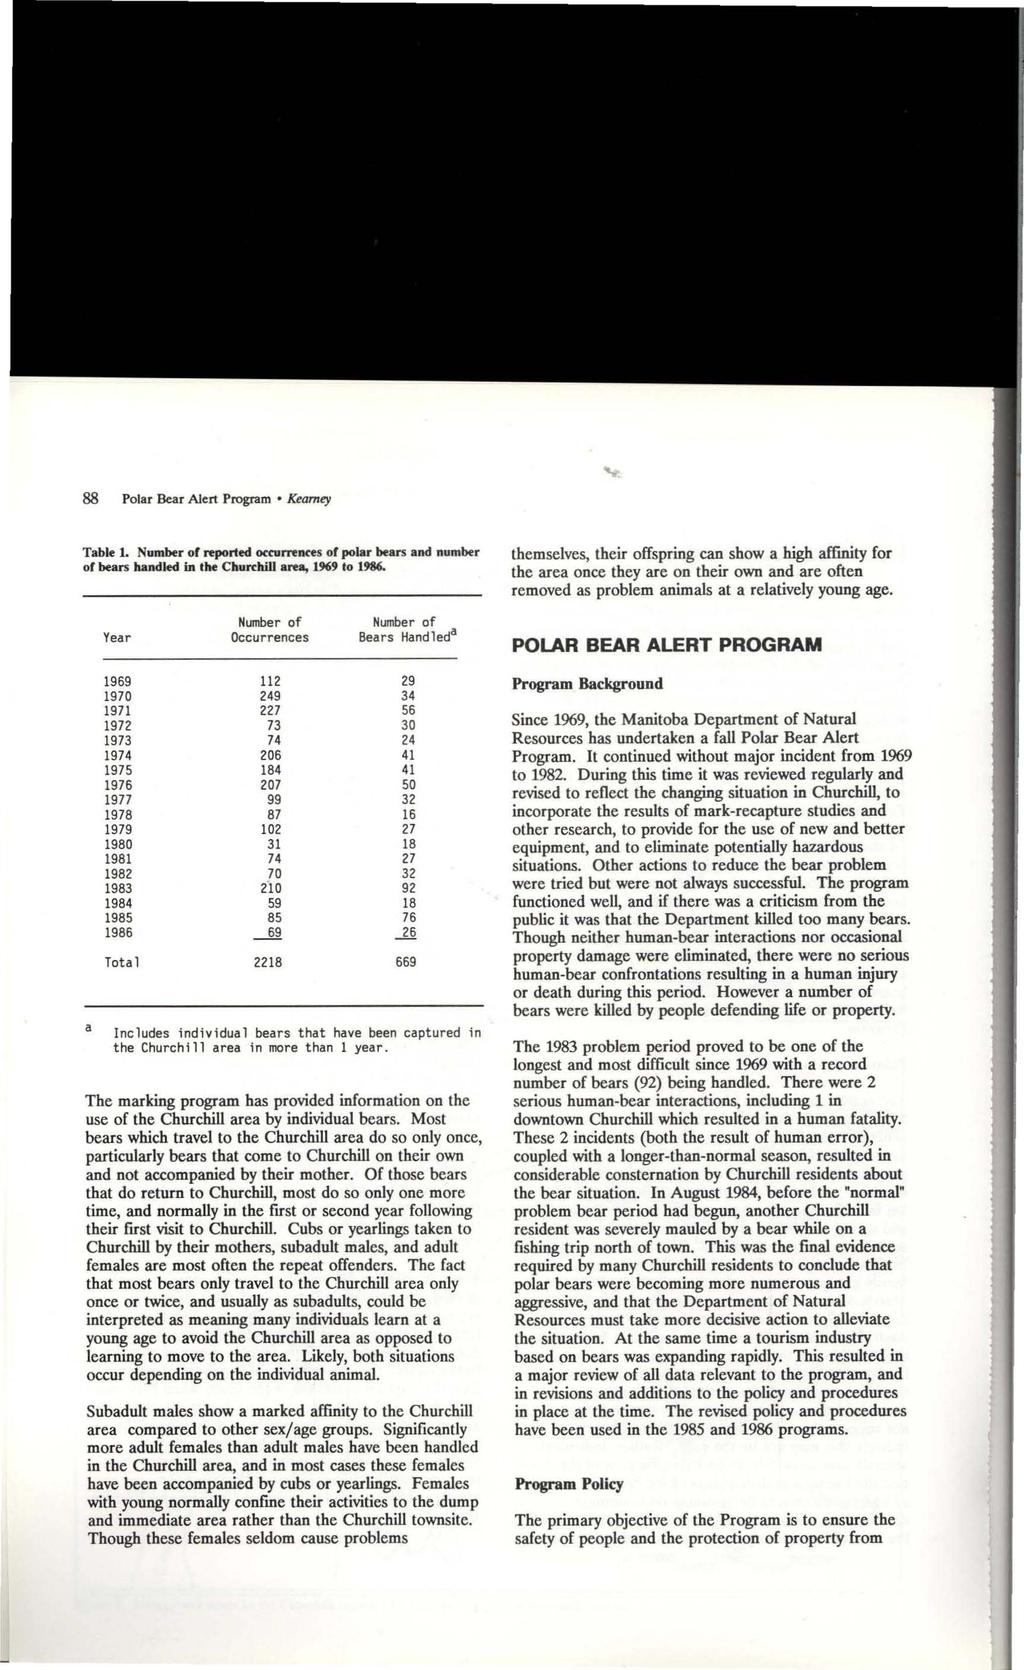 88 Polar Bear Alert Program Kearney Table 1. Number of reported O«UlTtrKfS of polar bears and number of bears handled in tm: Churdilll a~a, 1969 to 1986.